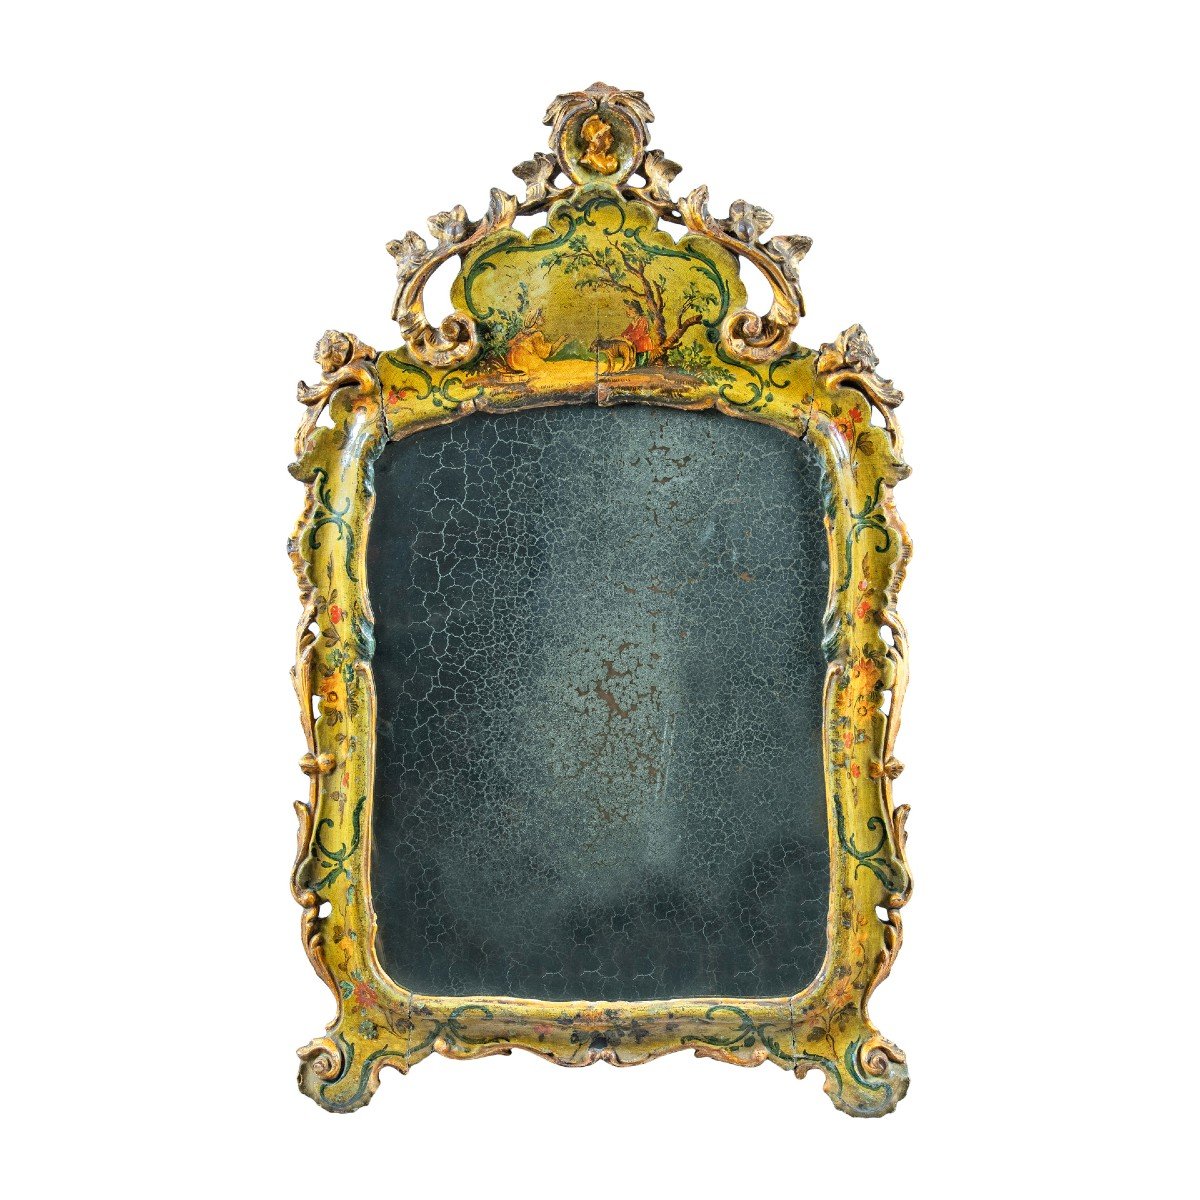 Carved, Lacquered And Painted Wooden Mirror. Venice, 18th Century